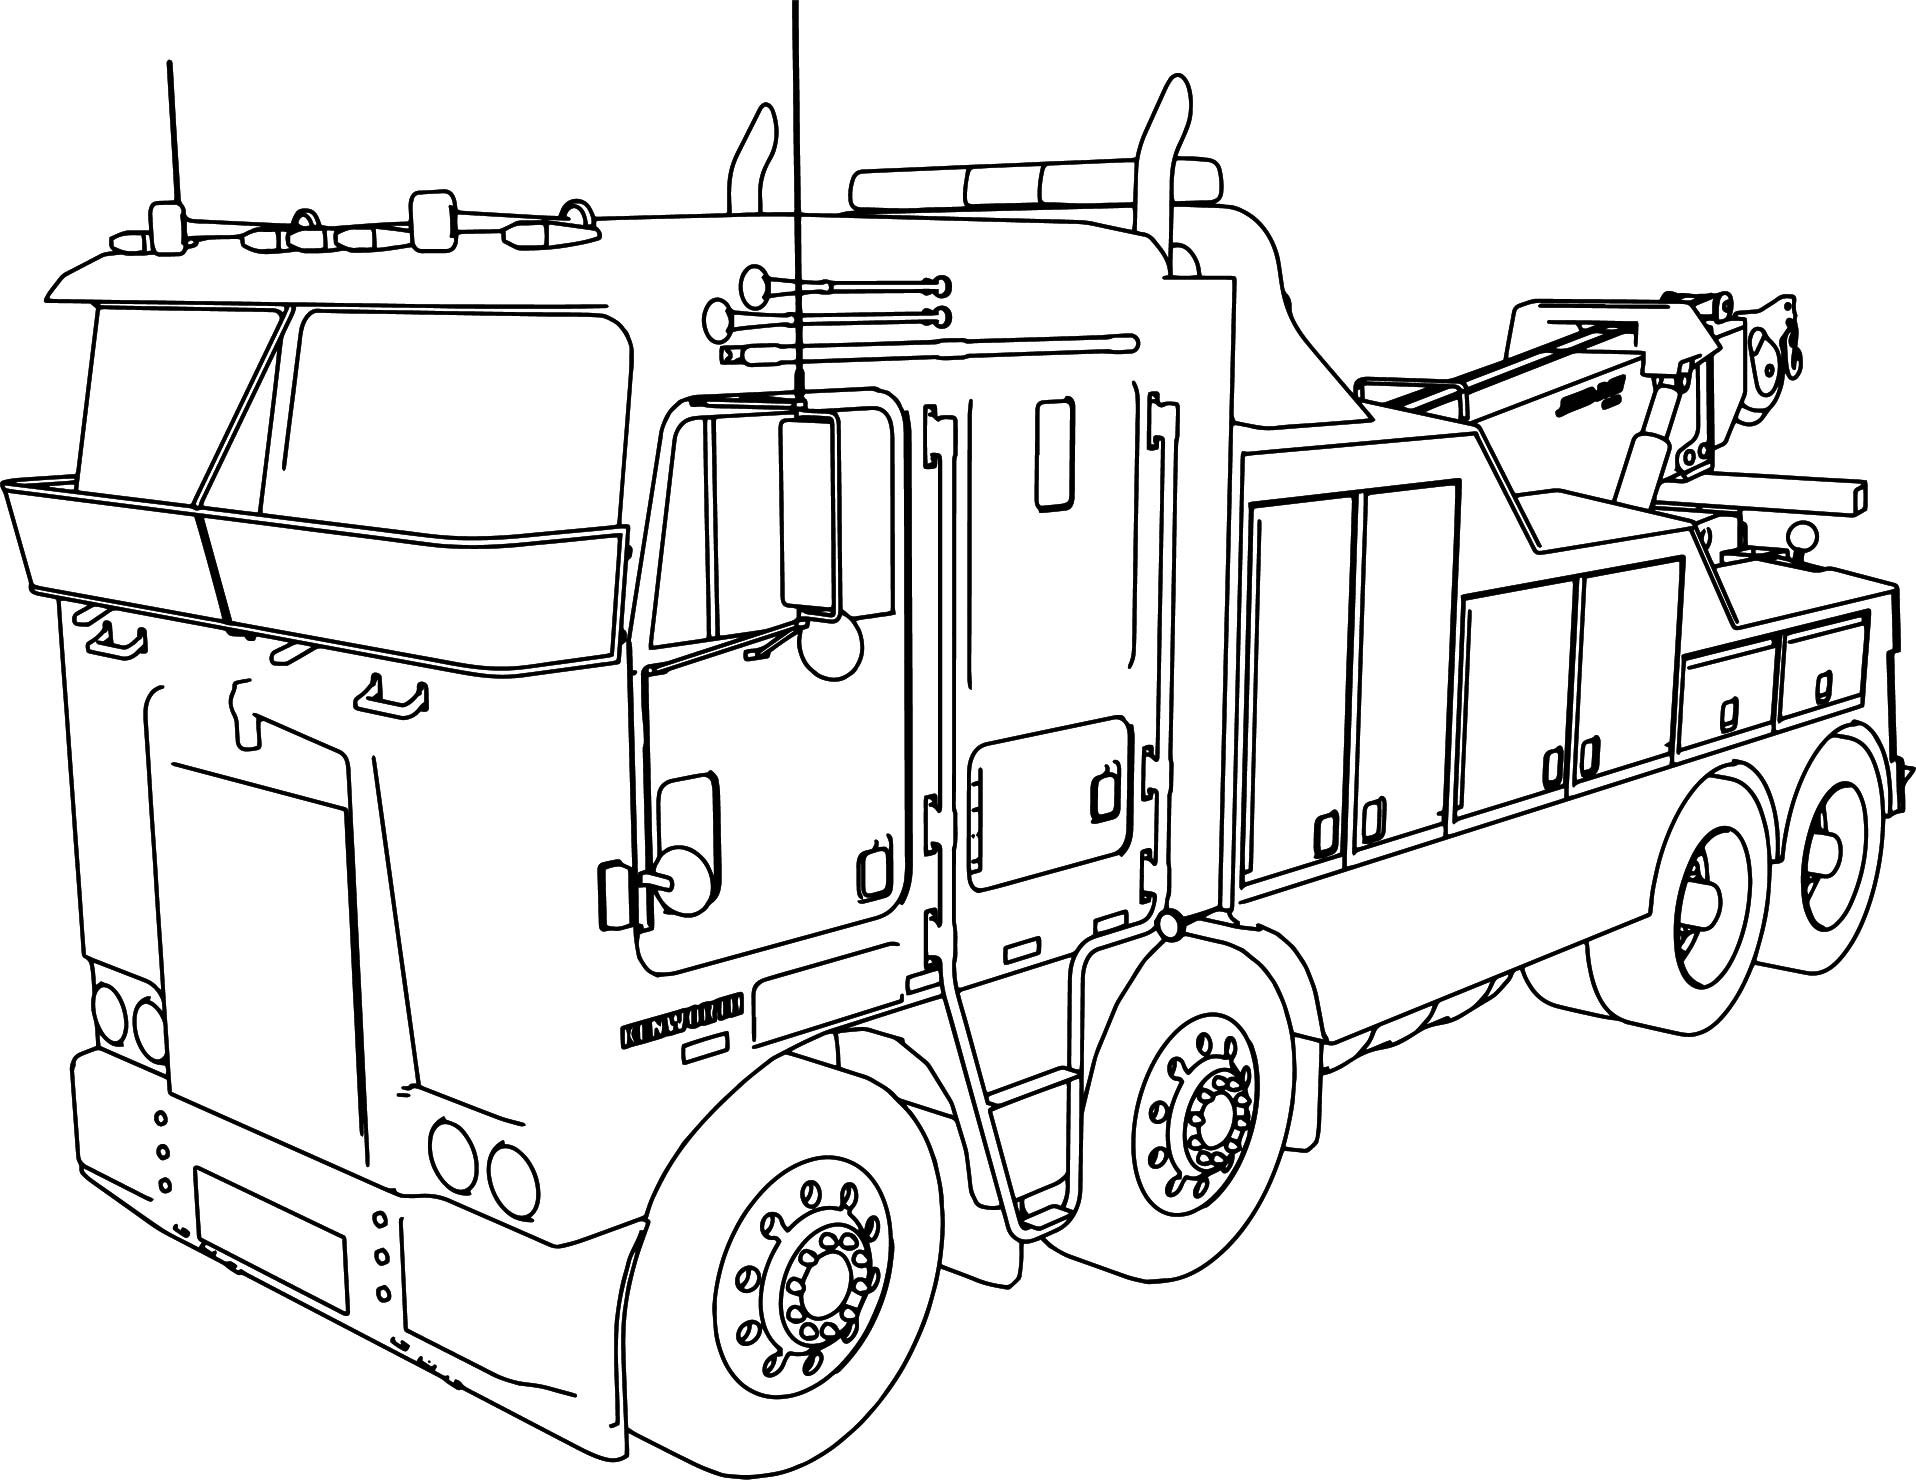 15 Most Bang-up Coloring Pages Log Trucking Page For Kids ...